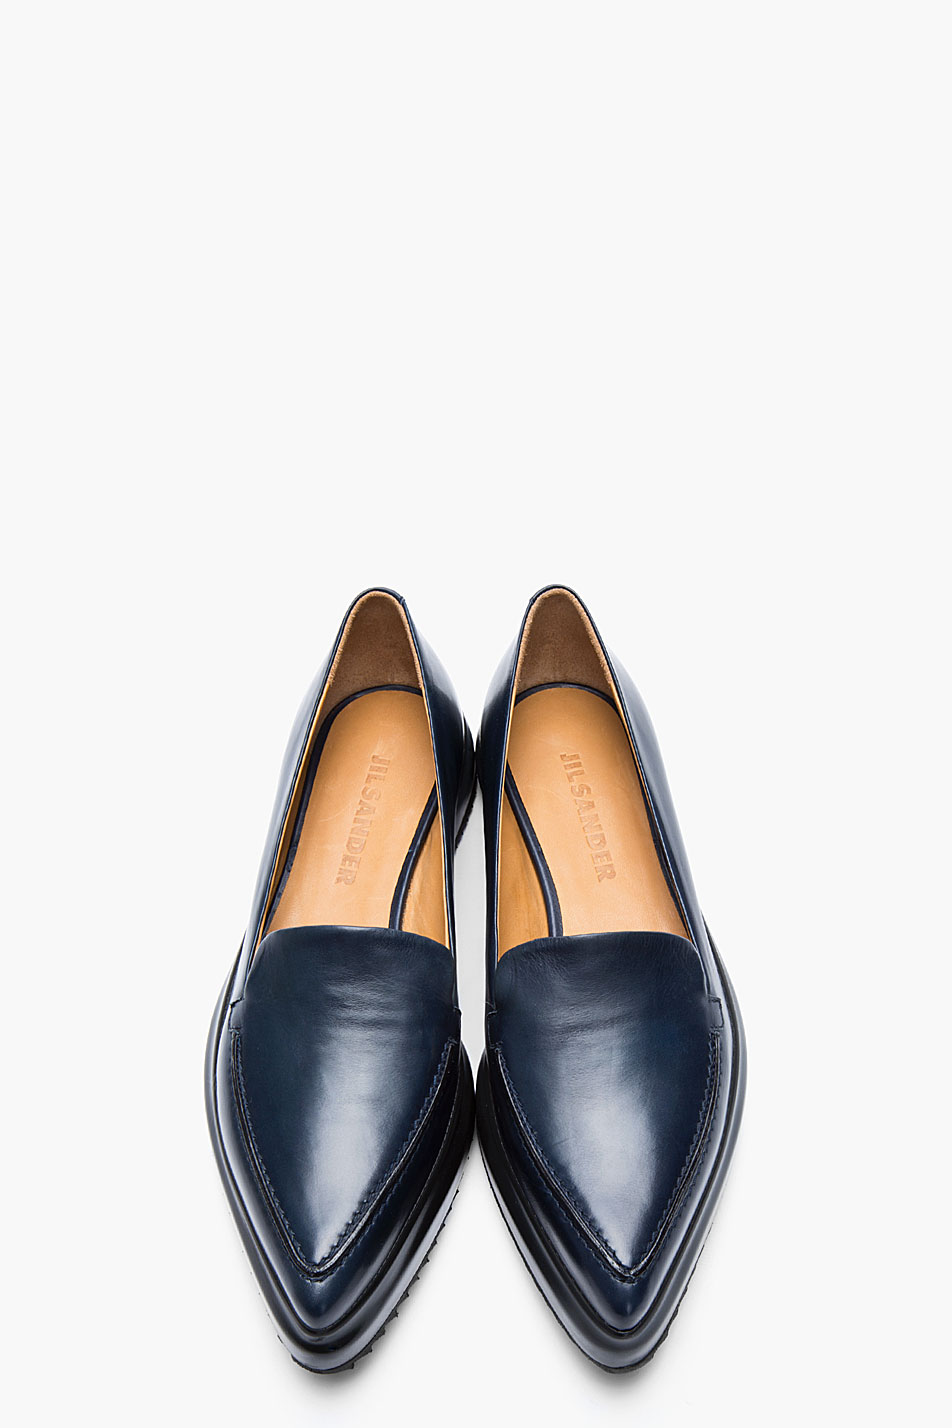 navy leather flats